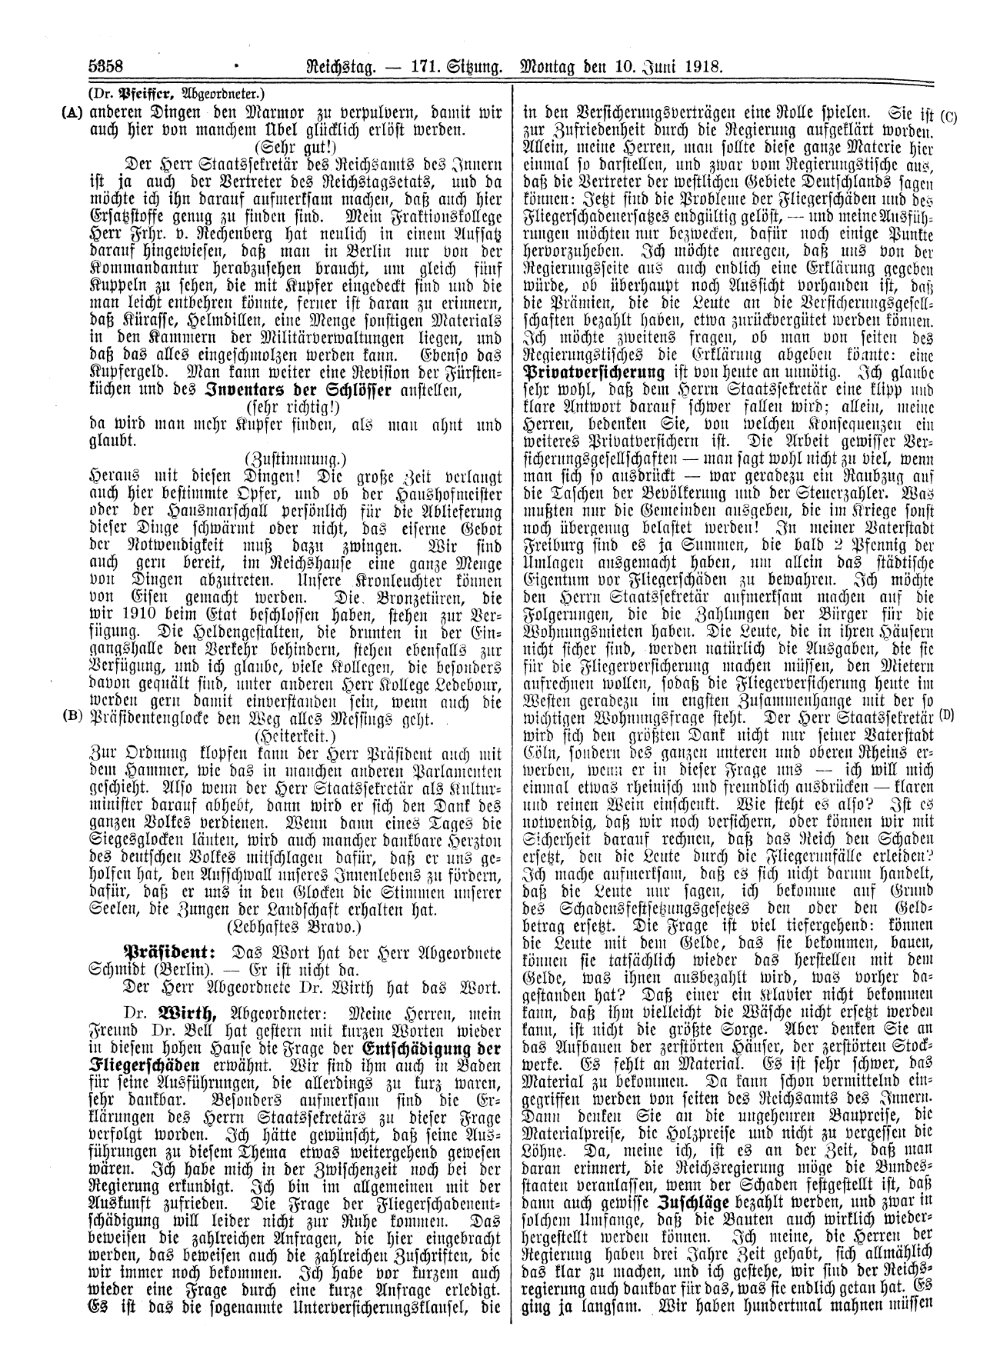 Scan of page 5358